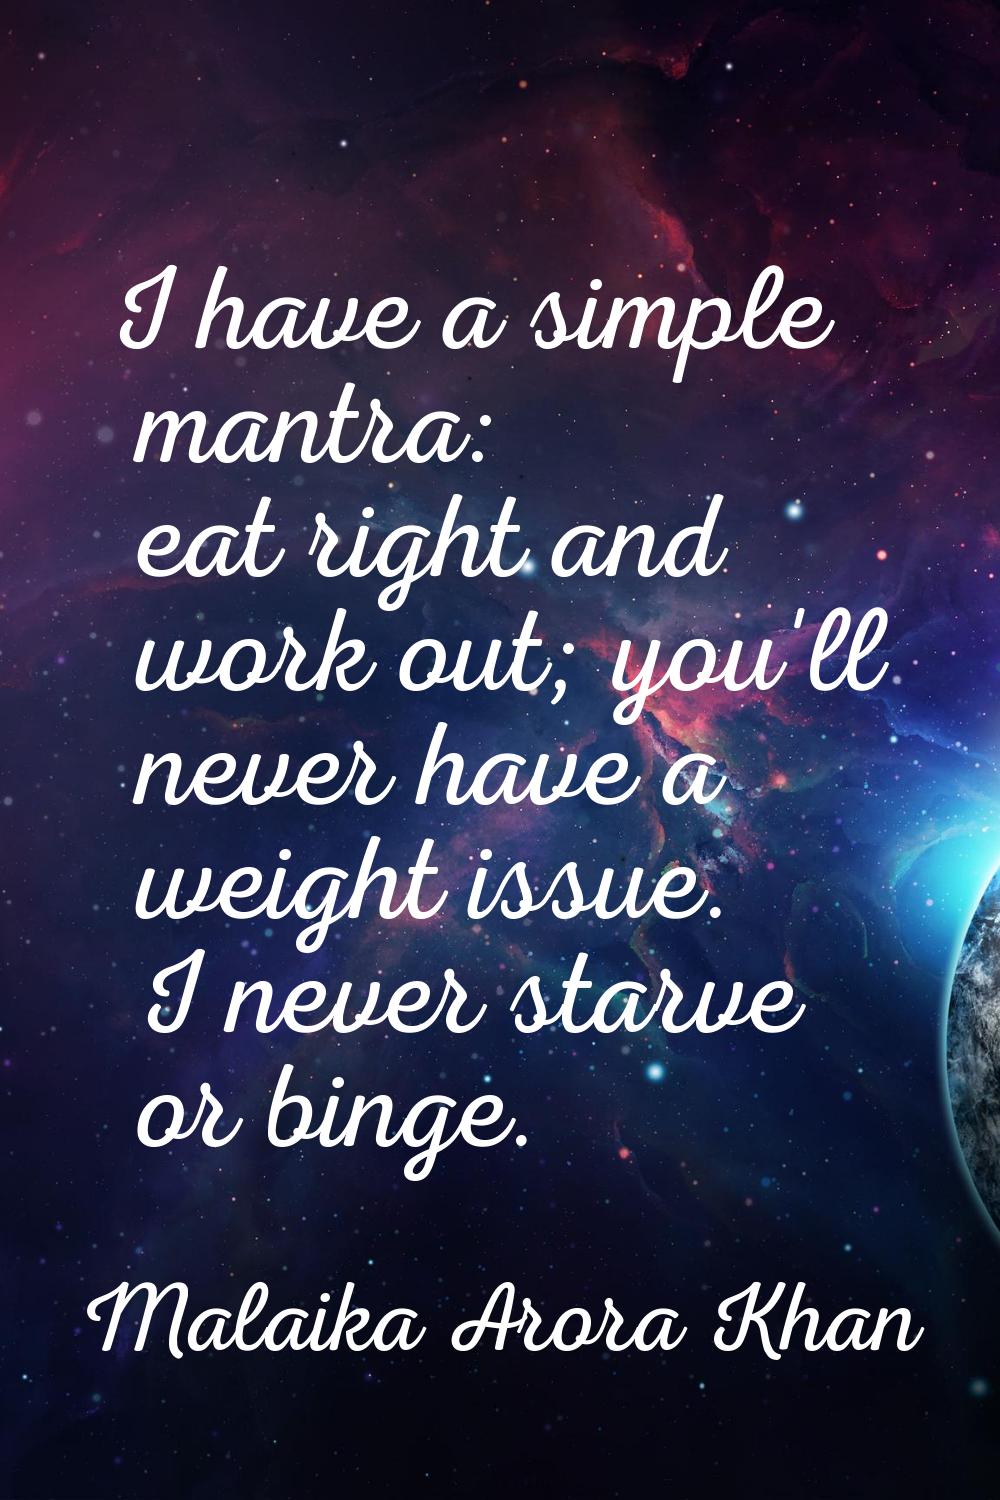 I have a simple mantra: eat right and work out; you'll never have a weight issue. I never starve or